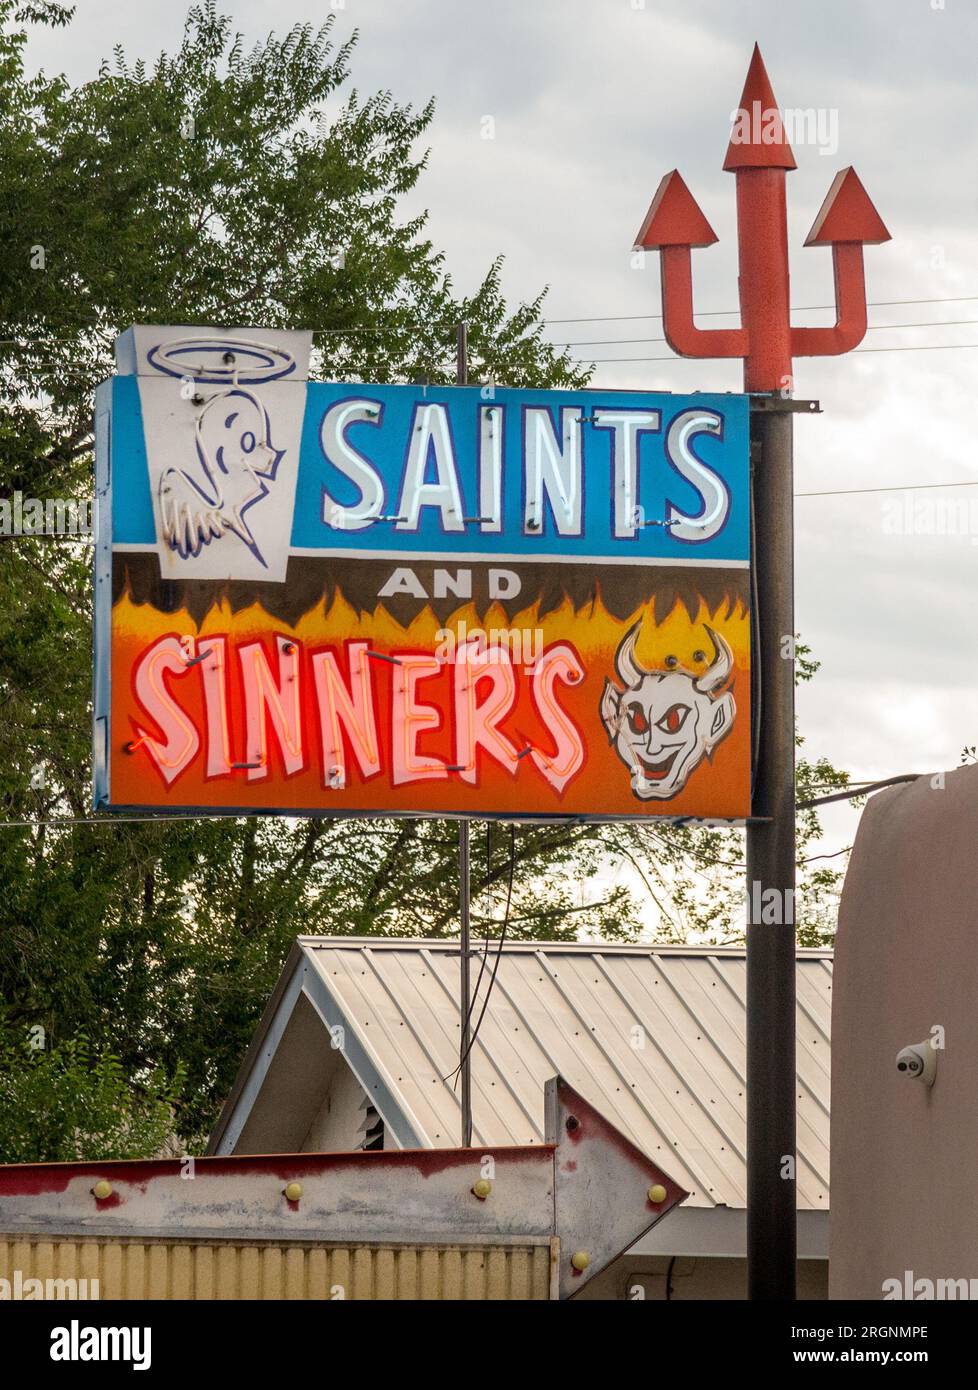 Sinners and Saints pub sign in Santa Fe, NM Stock Photo